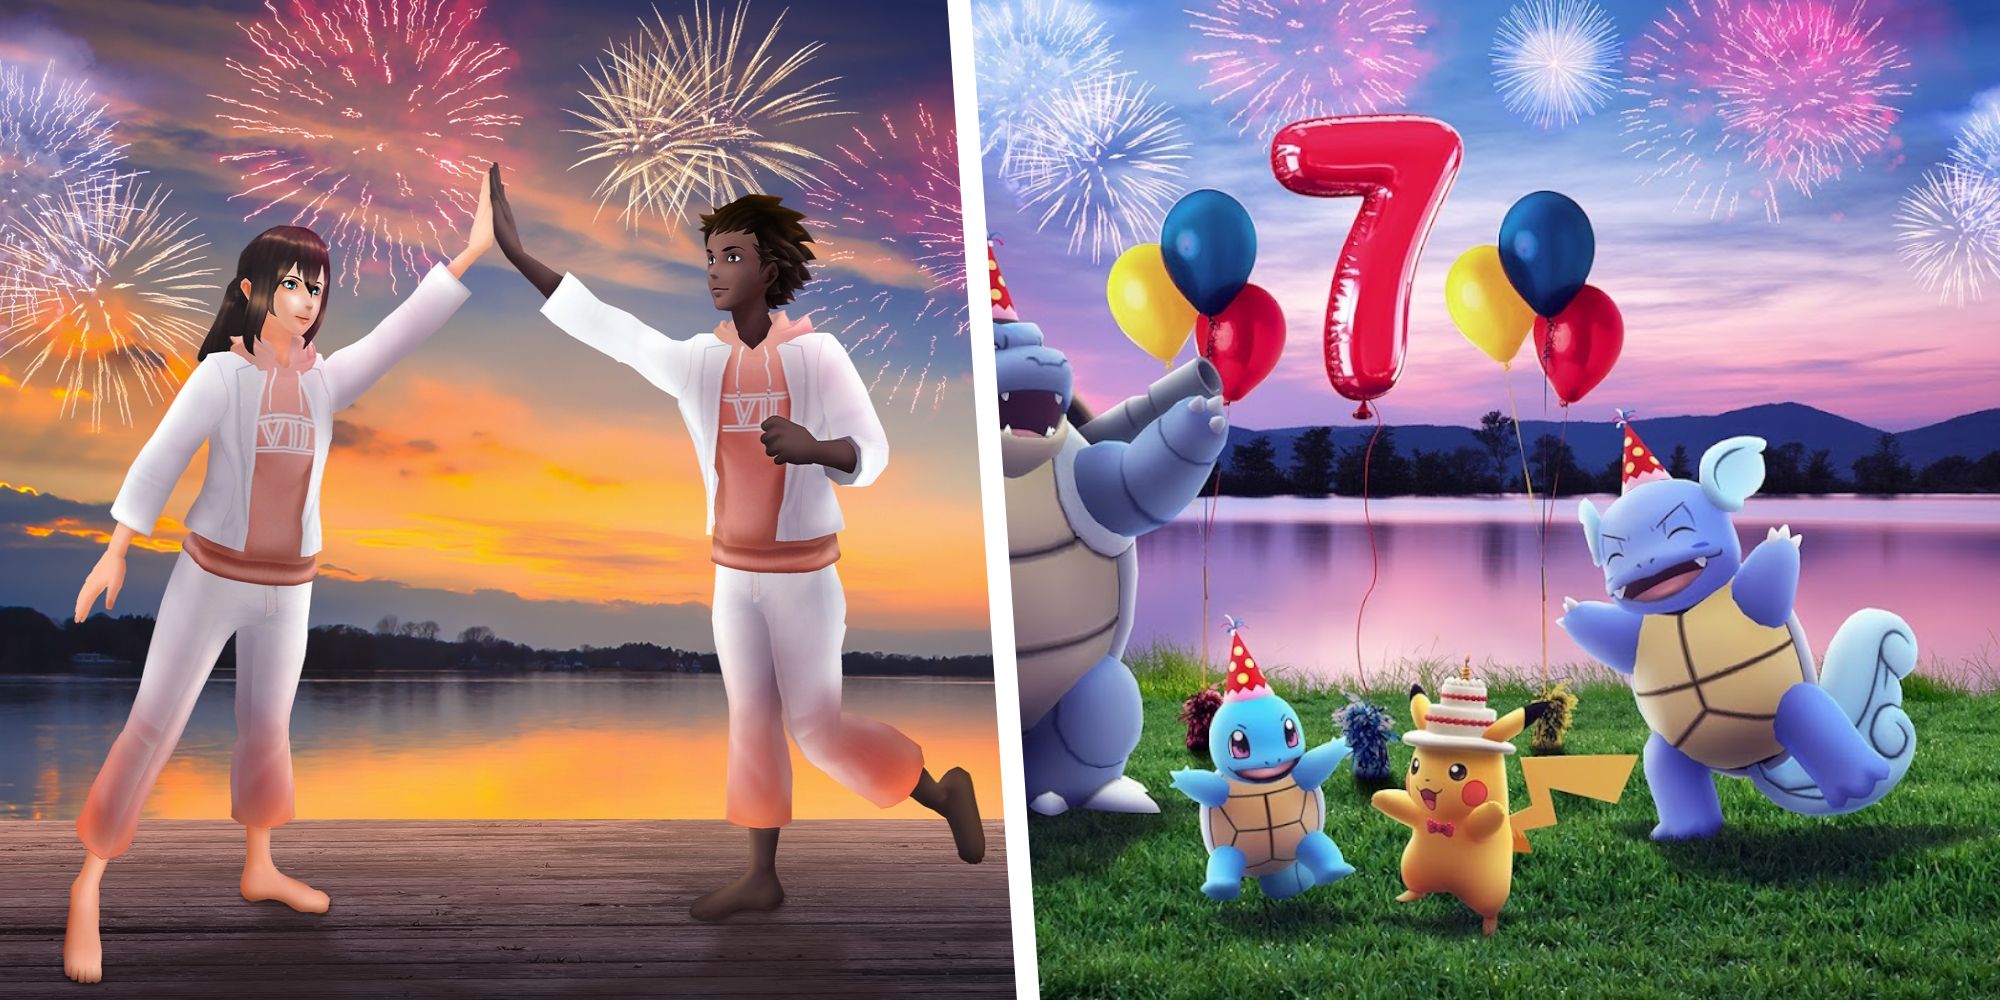 Collage Image of Pokemon Go showing two trainers celebrating and a Blastoise, Squirtle, Pikachu, and Wartortle celebrating as well.